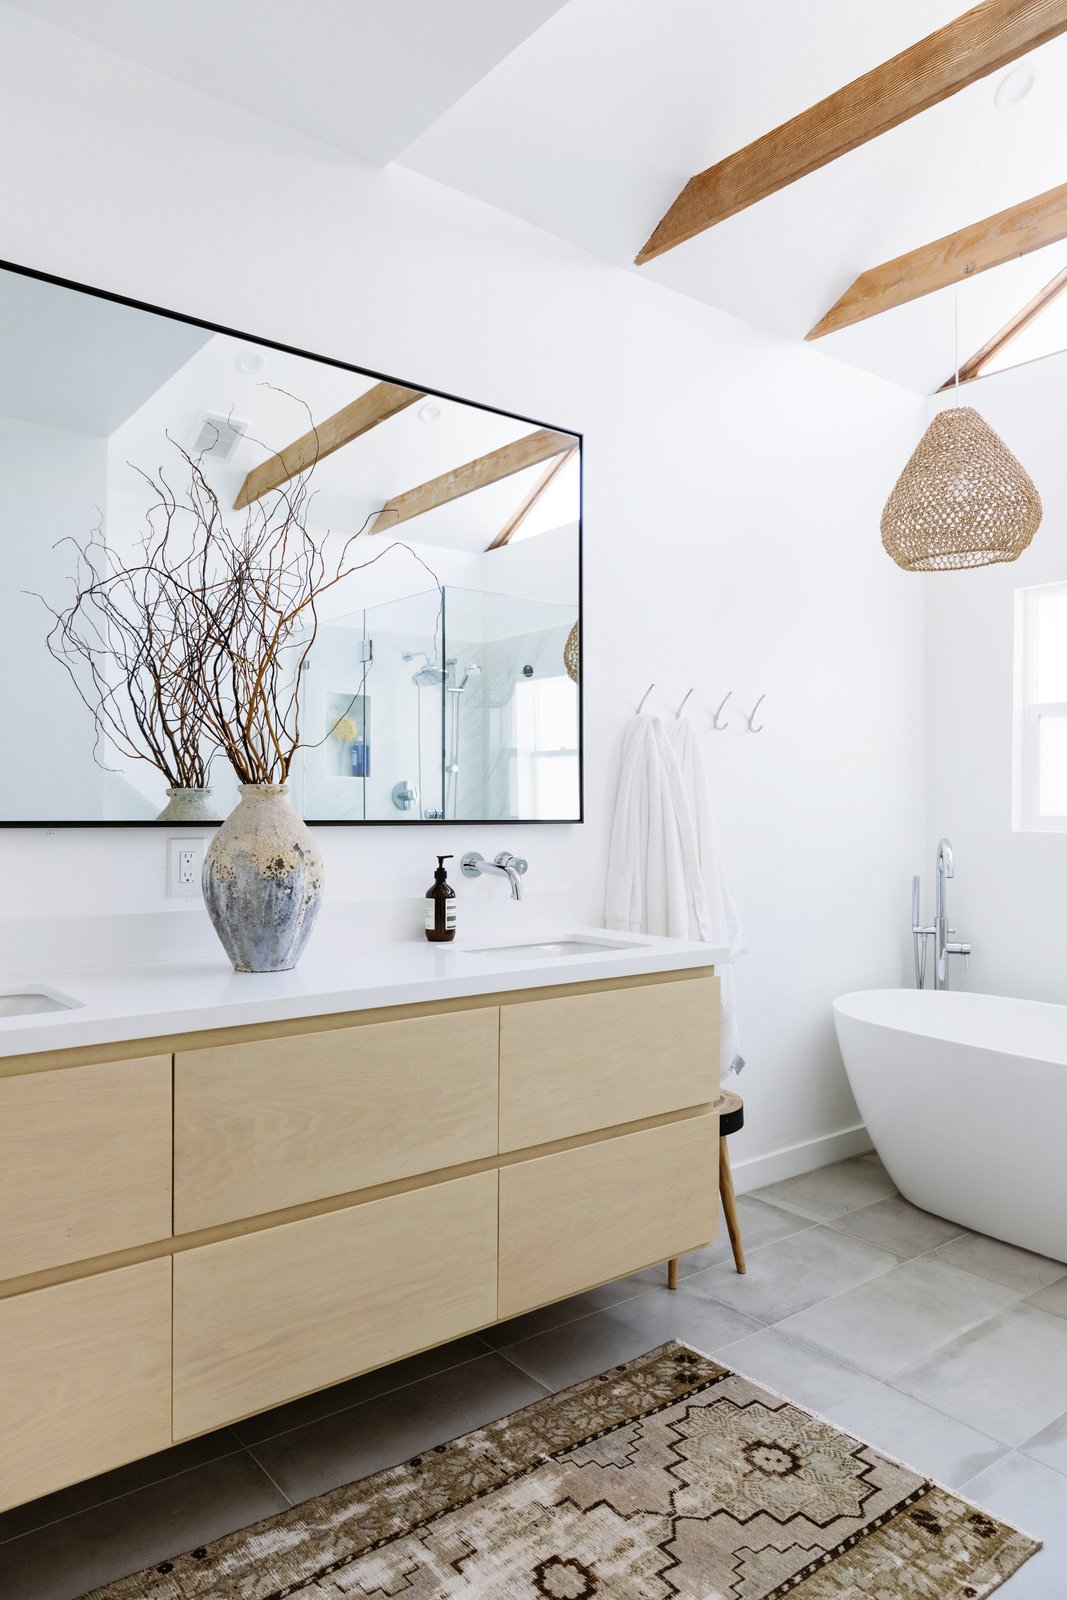 in the renovated master bathroom the couple opted for a natural wood vanity to complement the beams overhead a cool white color palette creates a serene atmosphere